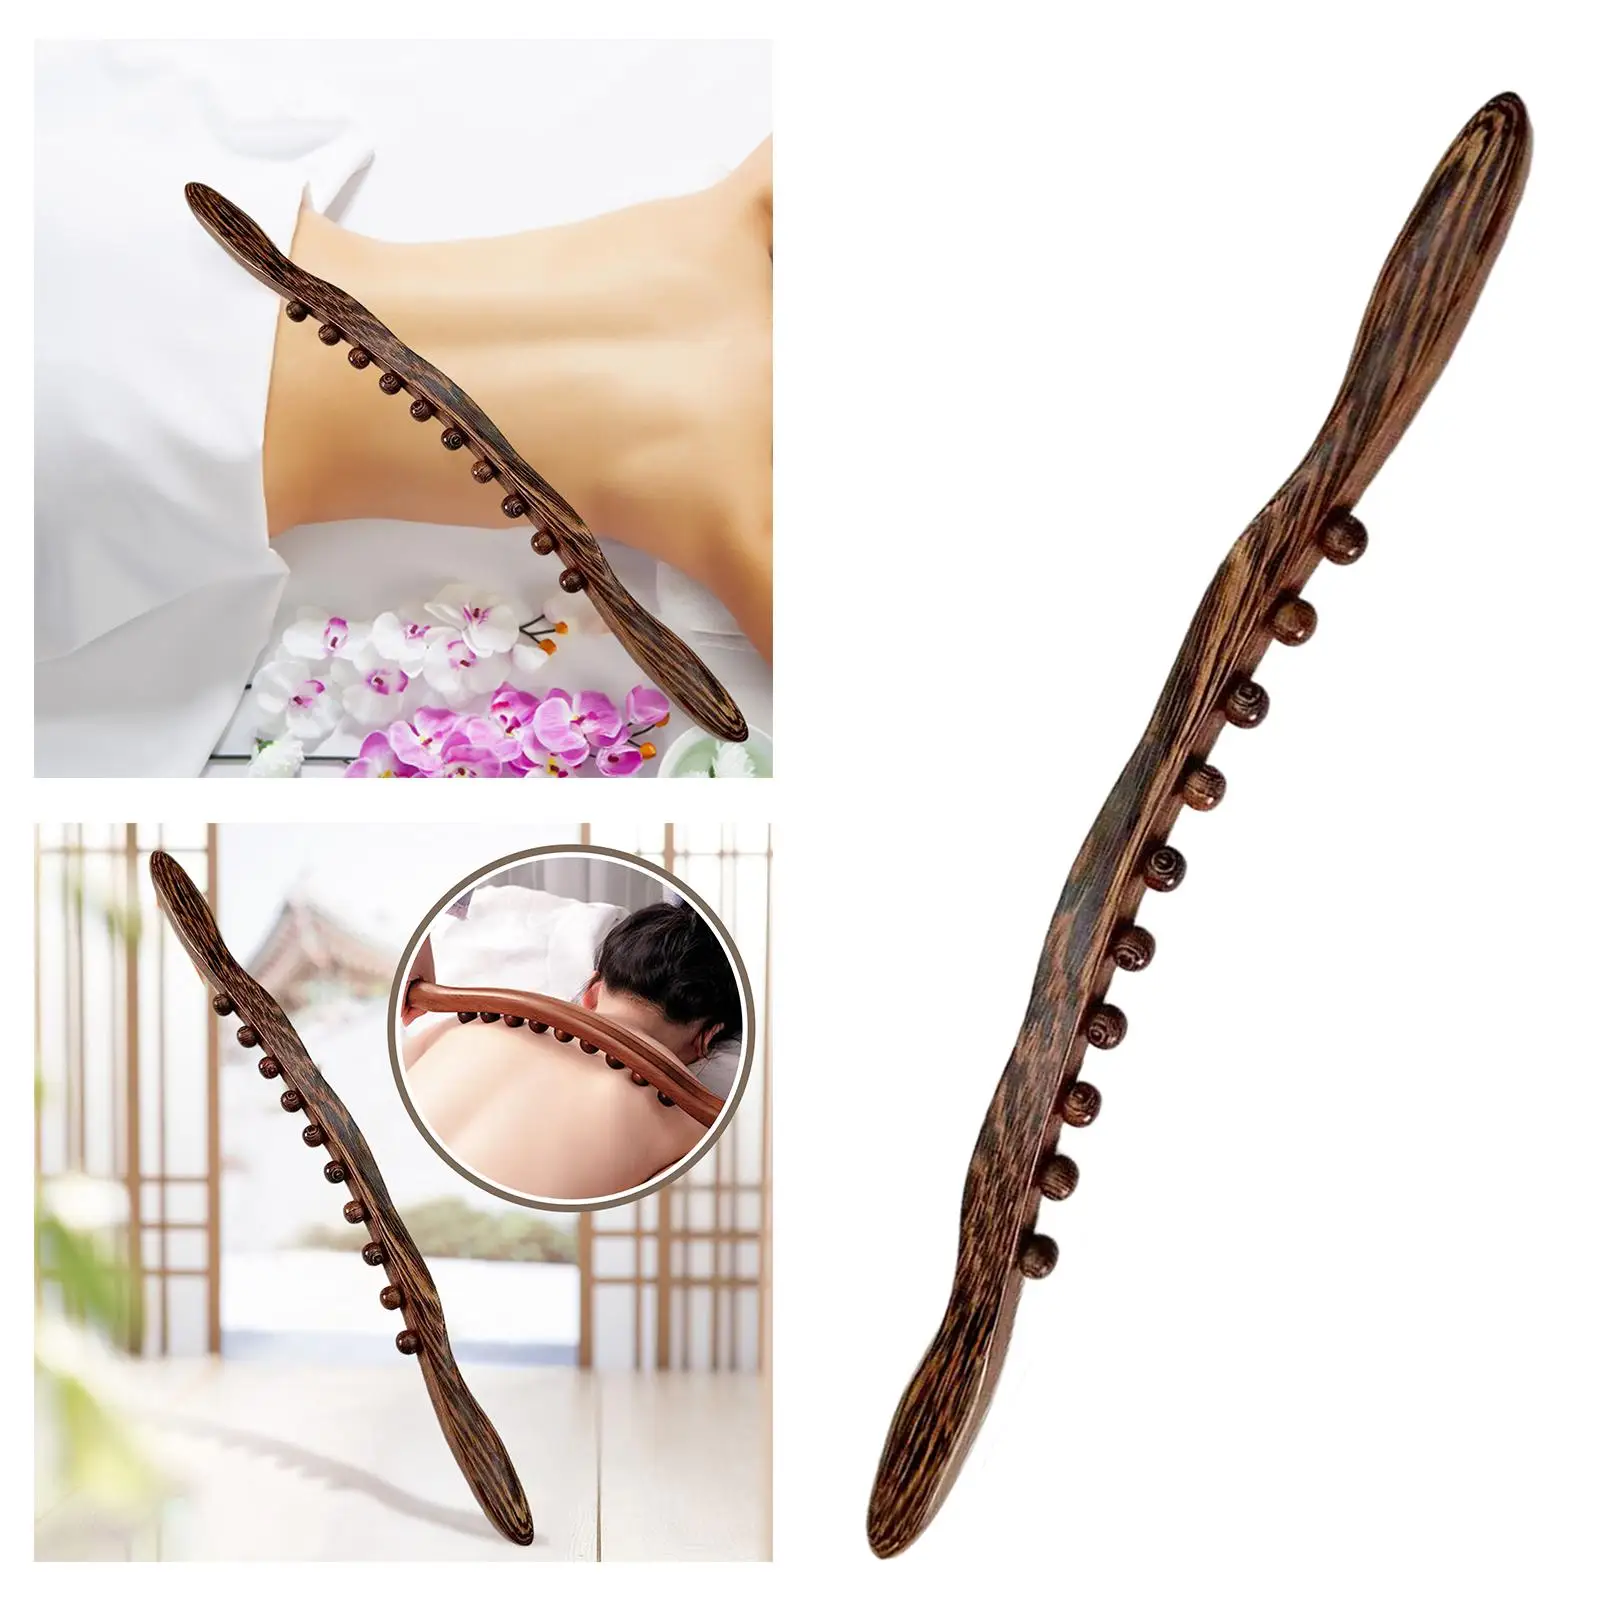 

Wood Gua Sha Scraping Tool Handheld Acupuncture Points Muscle Release 10 Beads Relieve Sore Muscles for Neck Back Thigh Shoulder